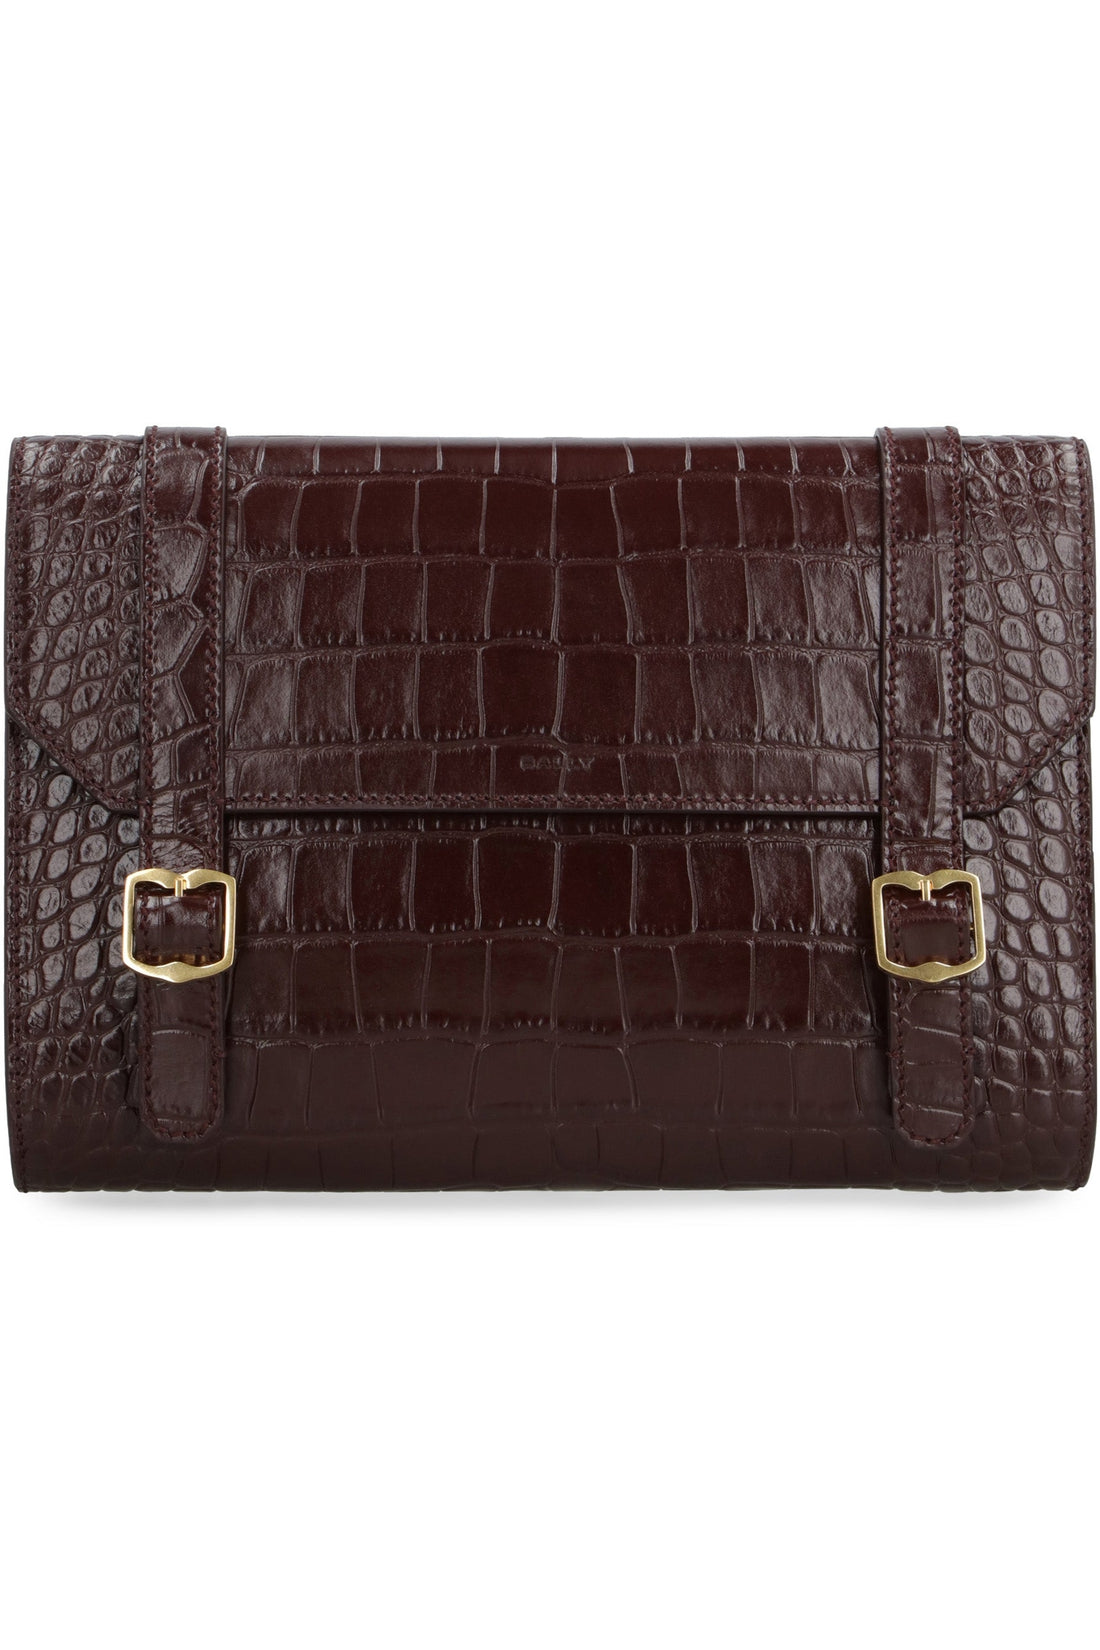 Bally-OUTLET-SALE-Printed leather clutch-ARCHIVIST